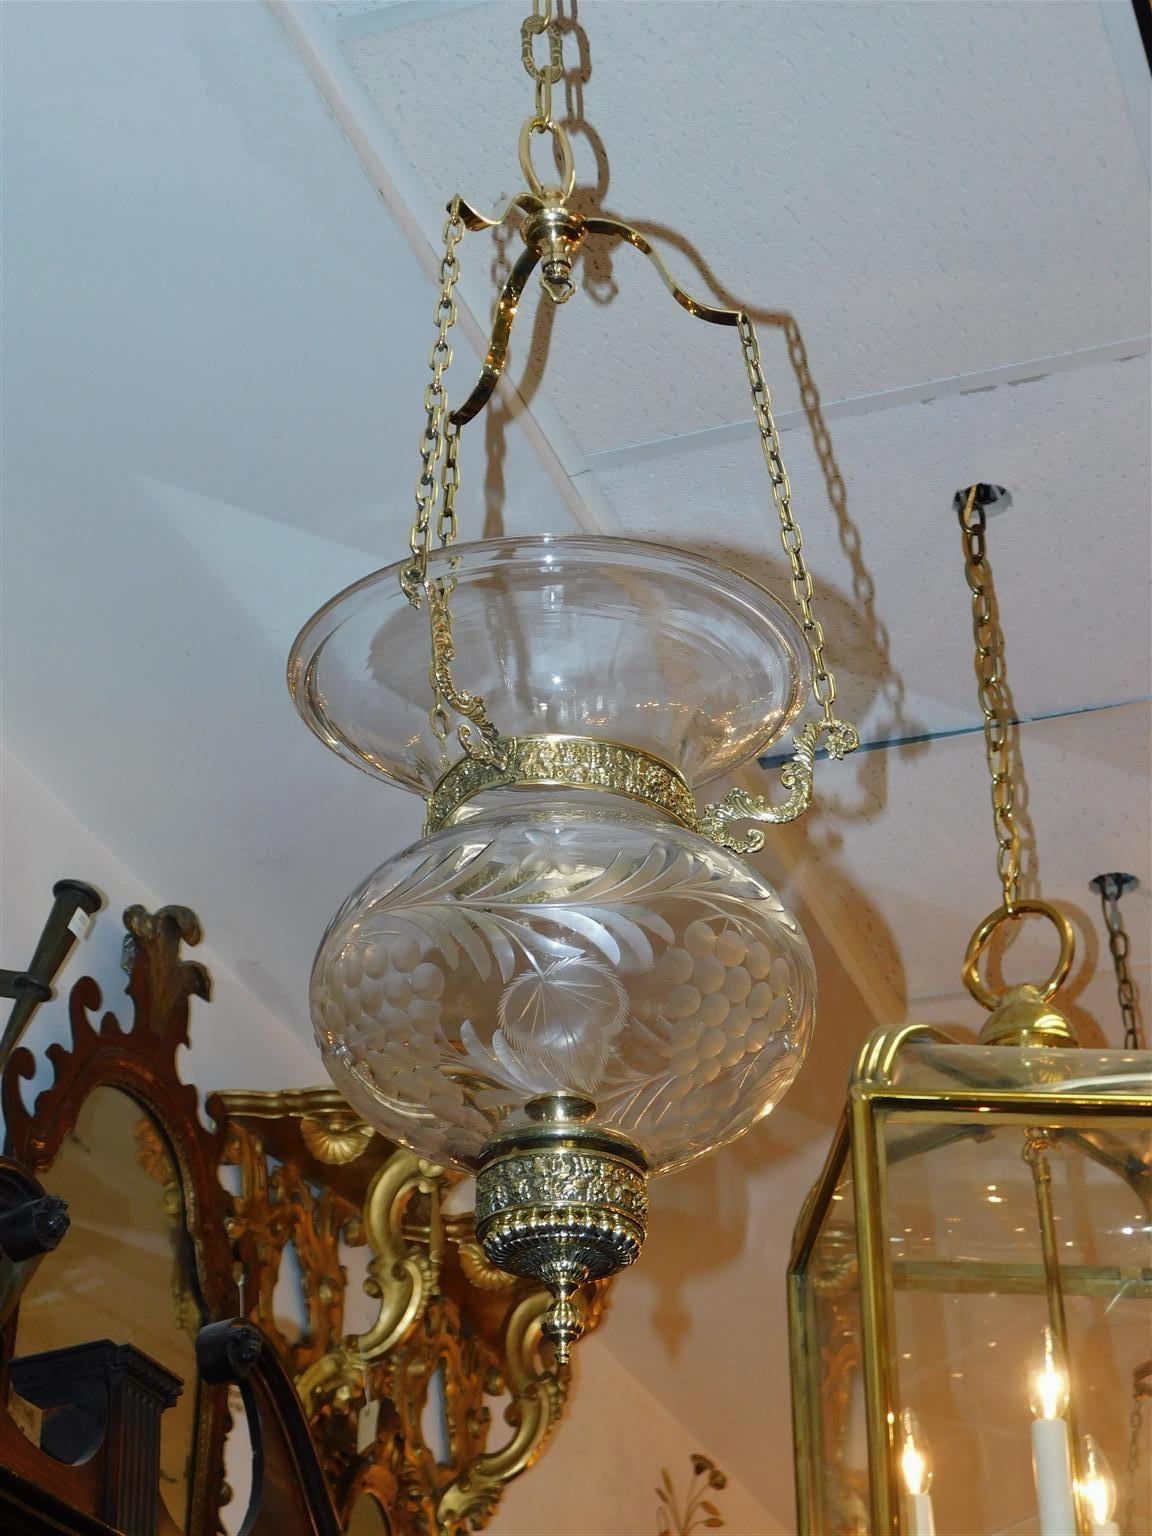 American brass and etched foliage glass globe hanging bell jar hall lantern with three decorative scrolled arms, grape vine motif, and finial bead work. Early 19th Century. Bell jar is candle powered but can be electrified if desired at no